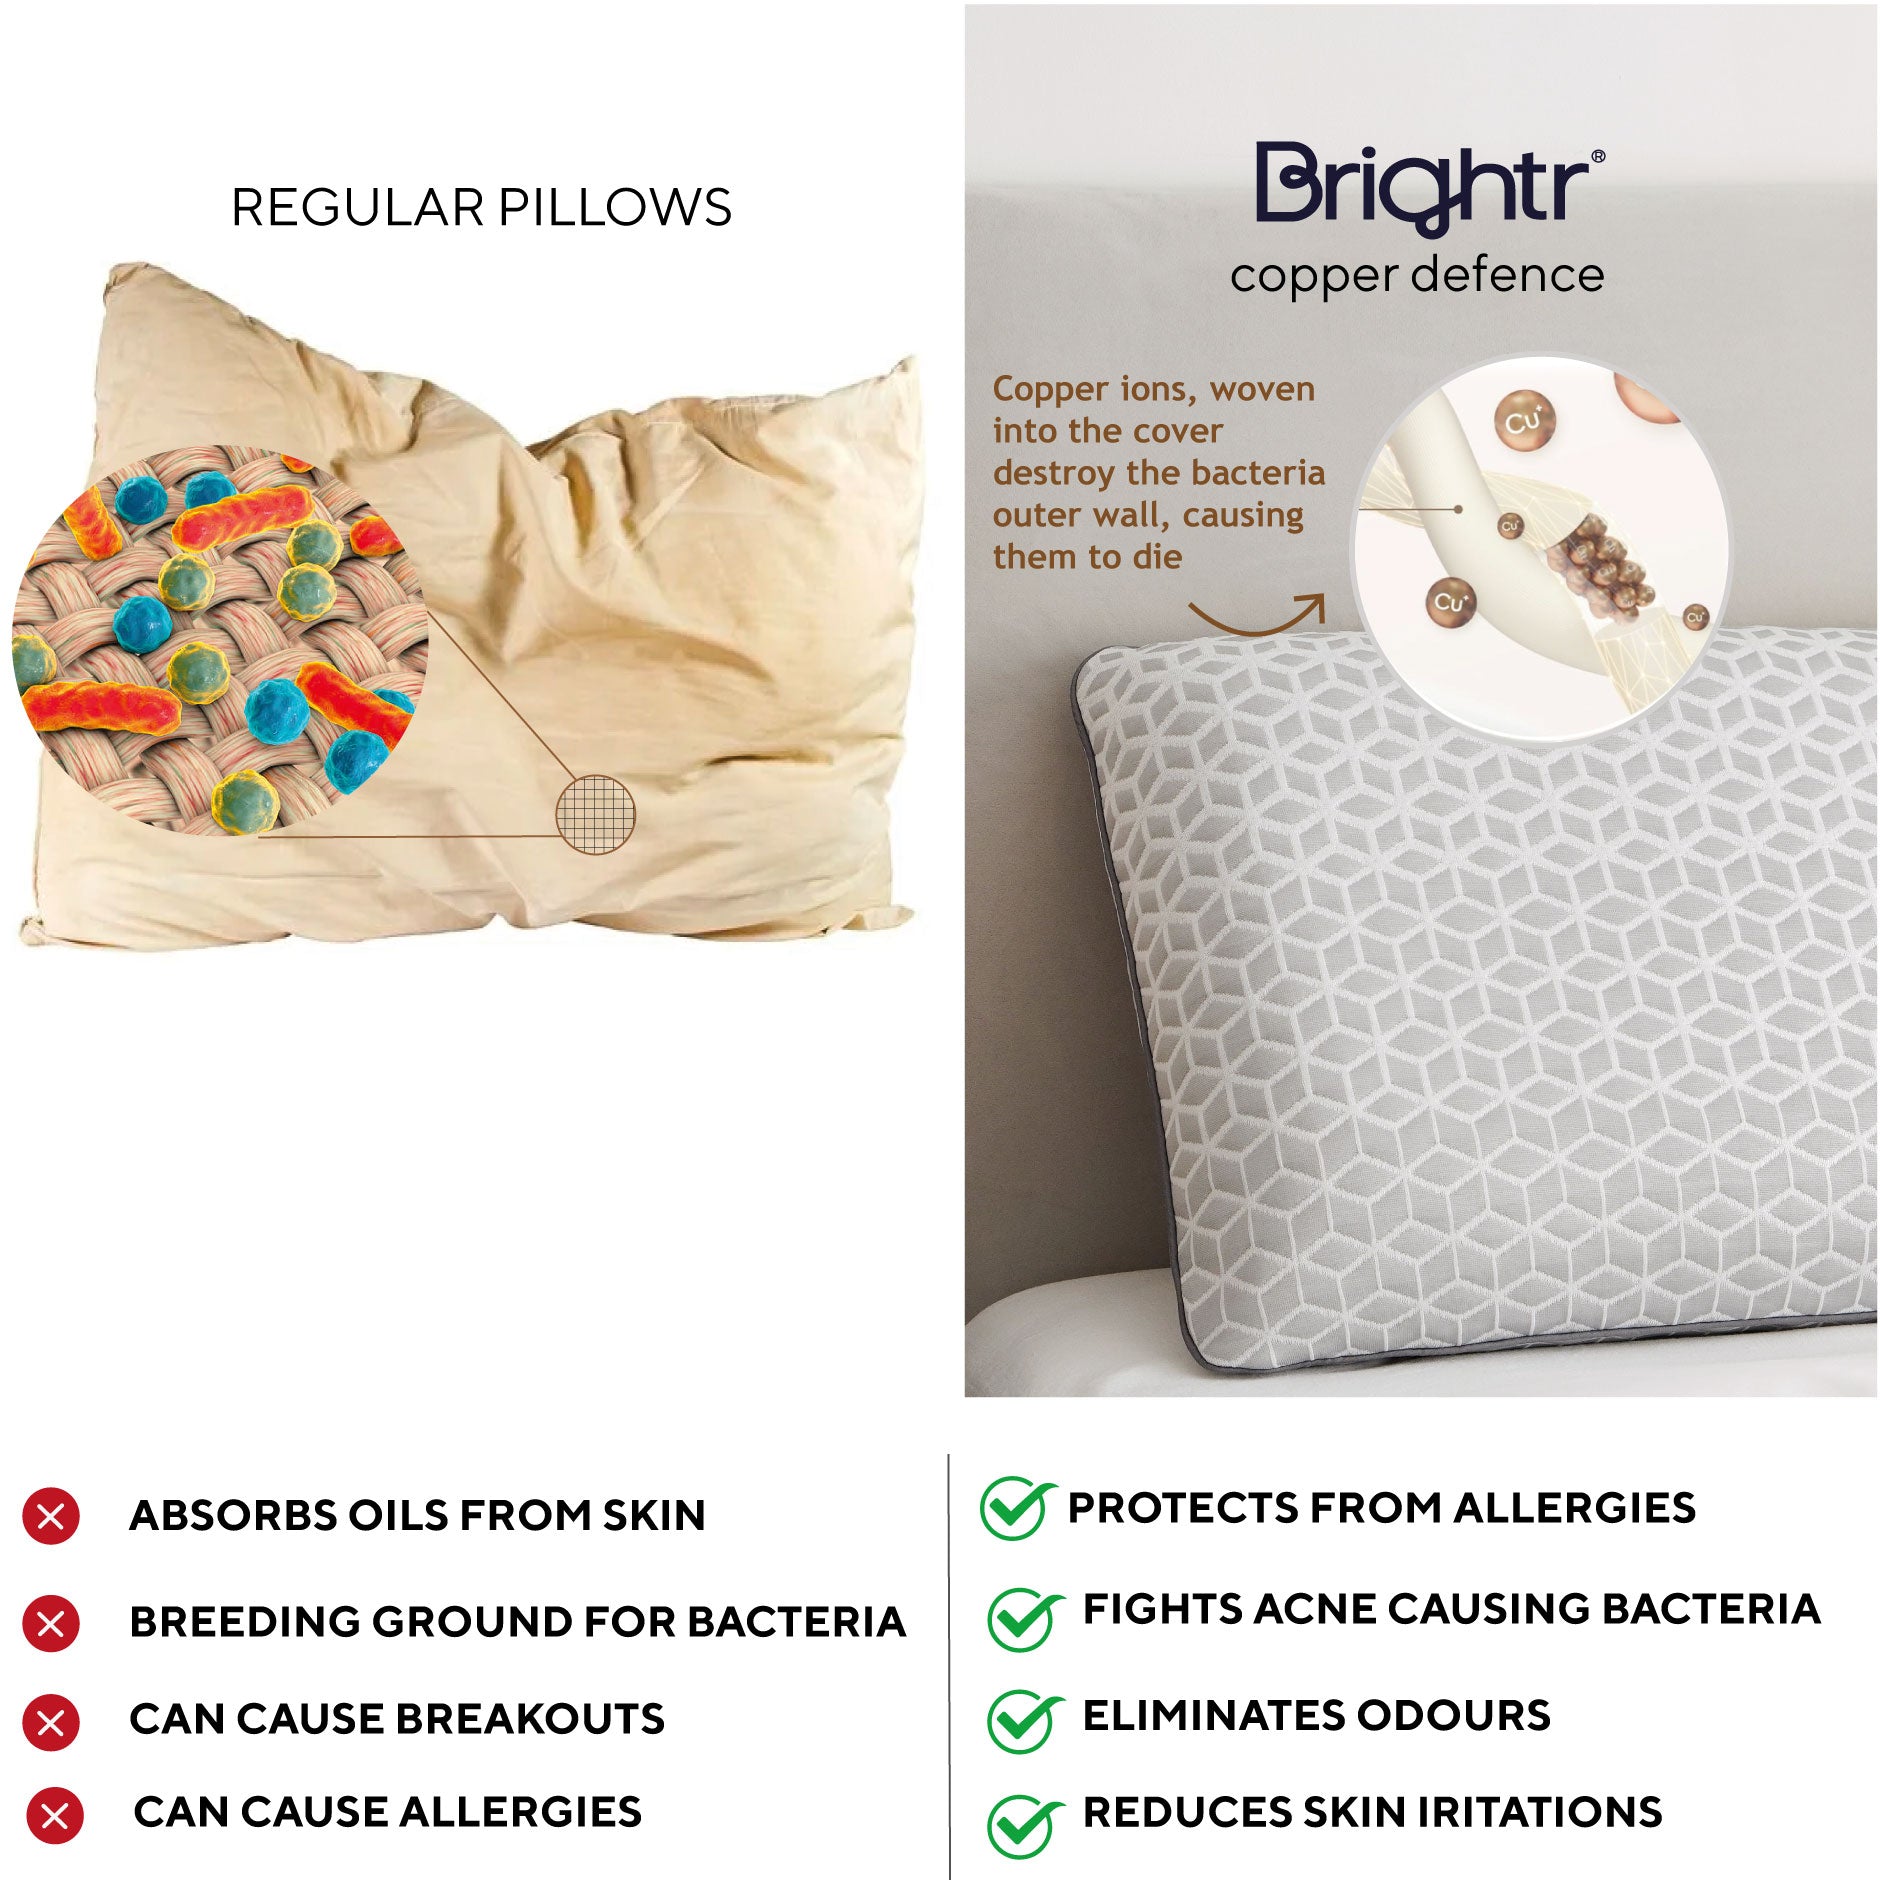 Brightr® Eclipse Orthopedic Memory Foam Pillow - Copper Anti-bacterial Protection